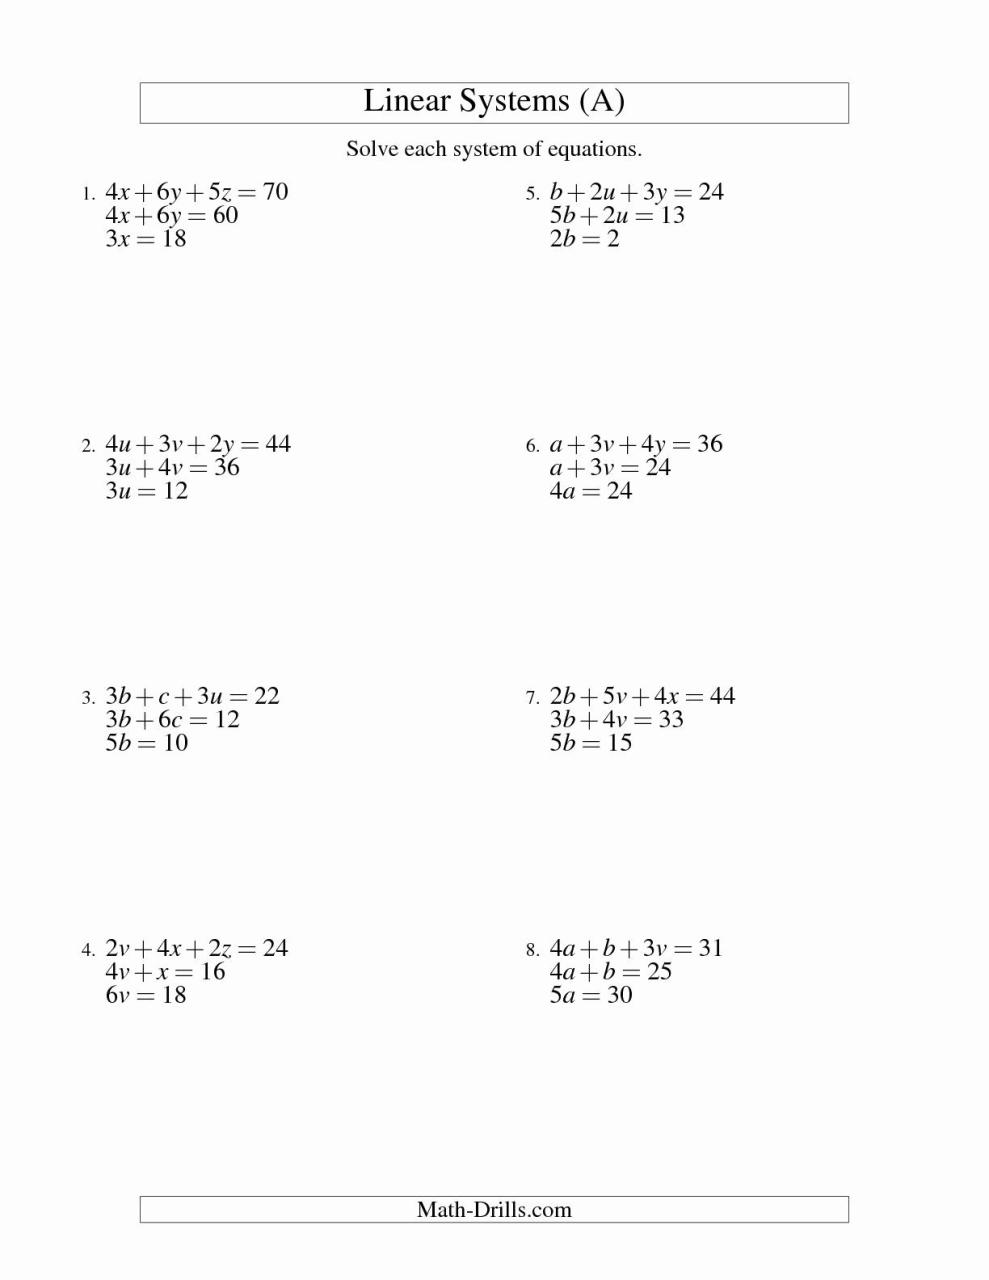 Solving Systems Of Equations Algebraically Worksheet Answers 3 2